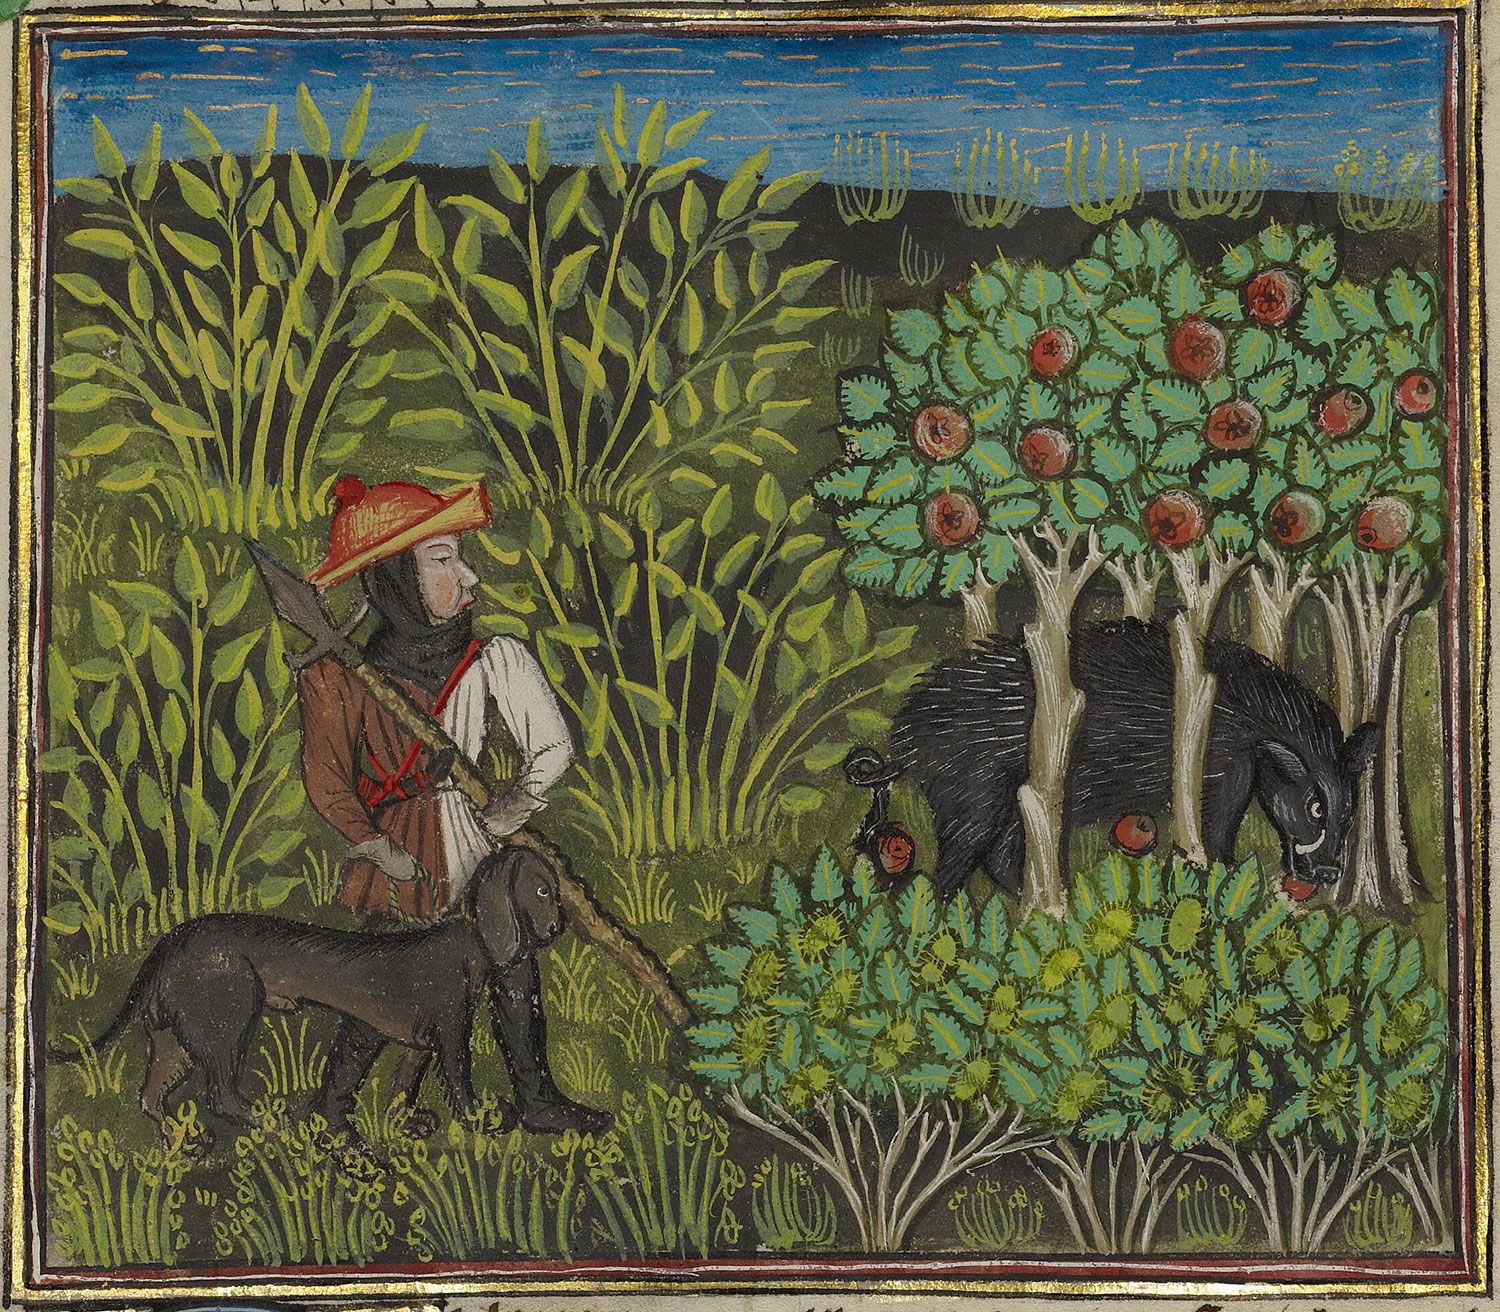 A very grumpy boar hides among the apple trees, marveling at the stupidity of hunter and hound.